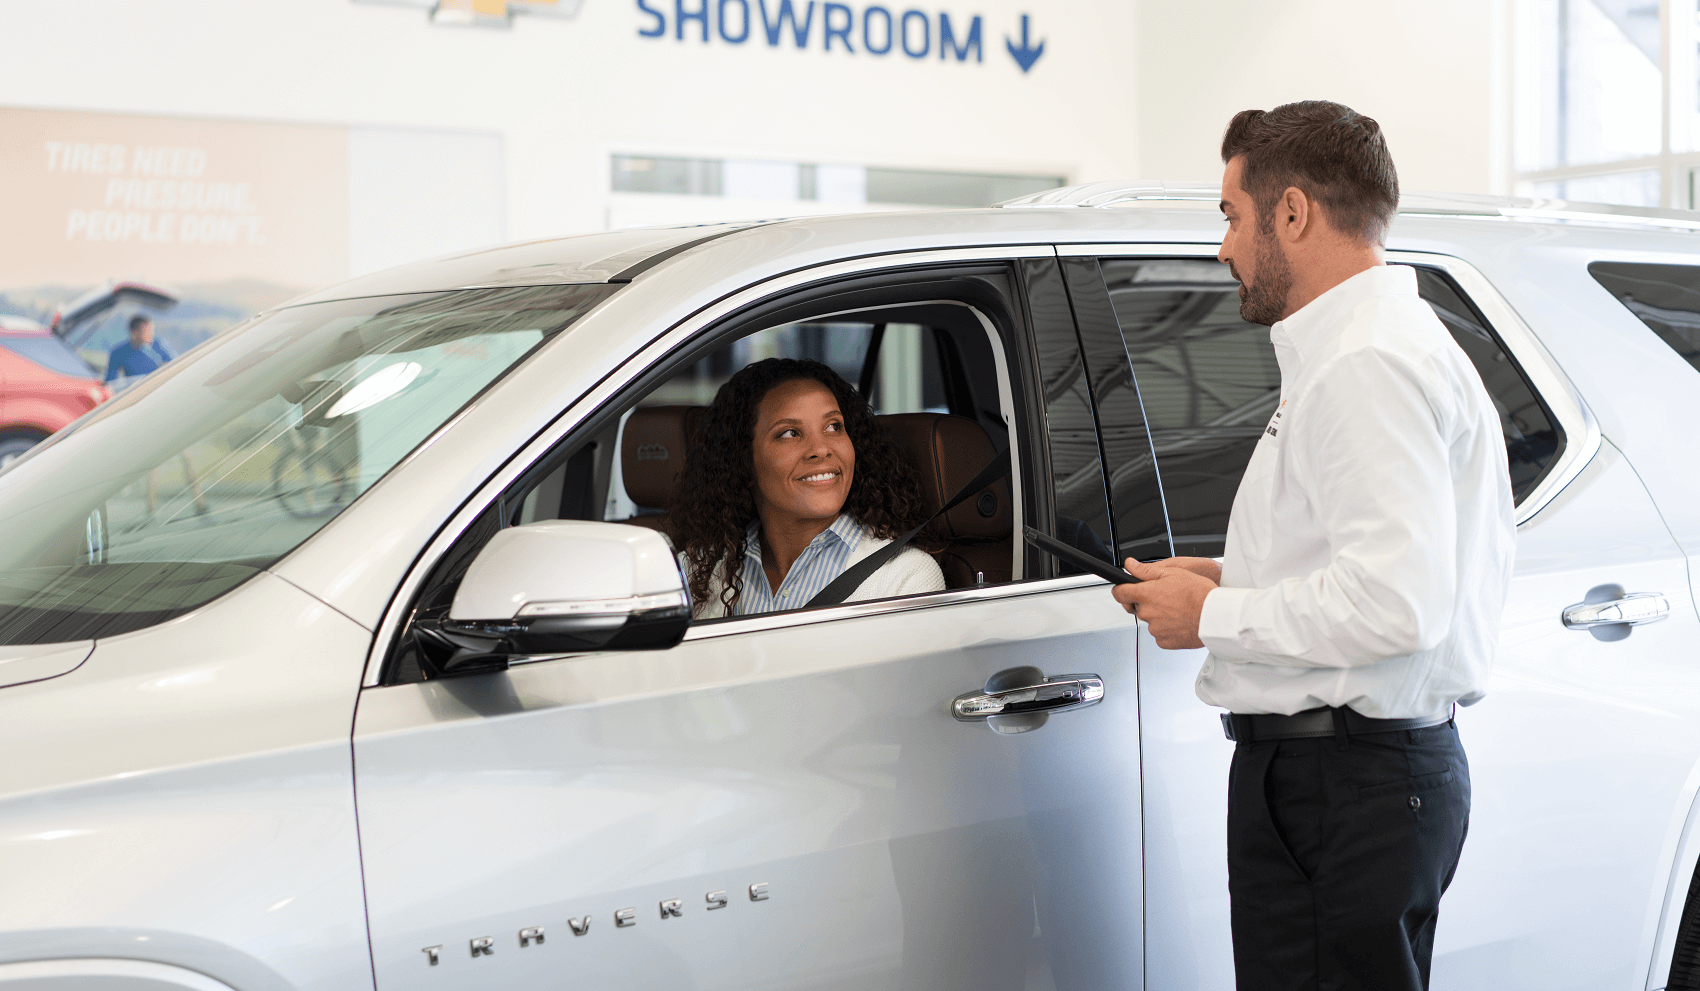 chevy finance professional greets smiling customer